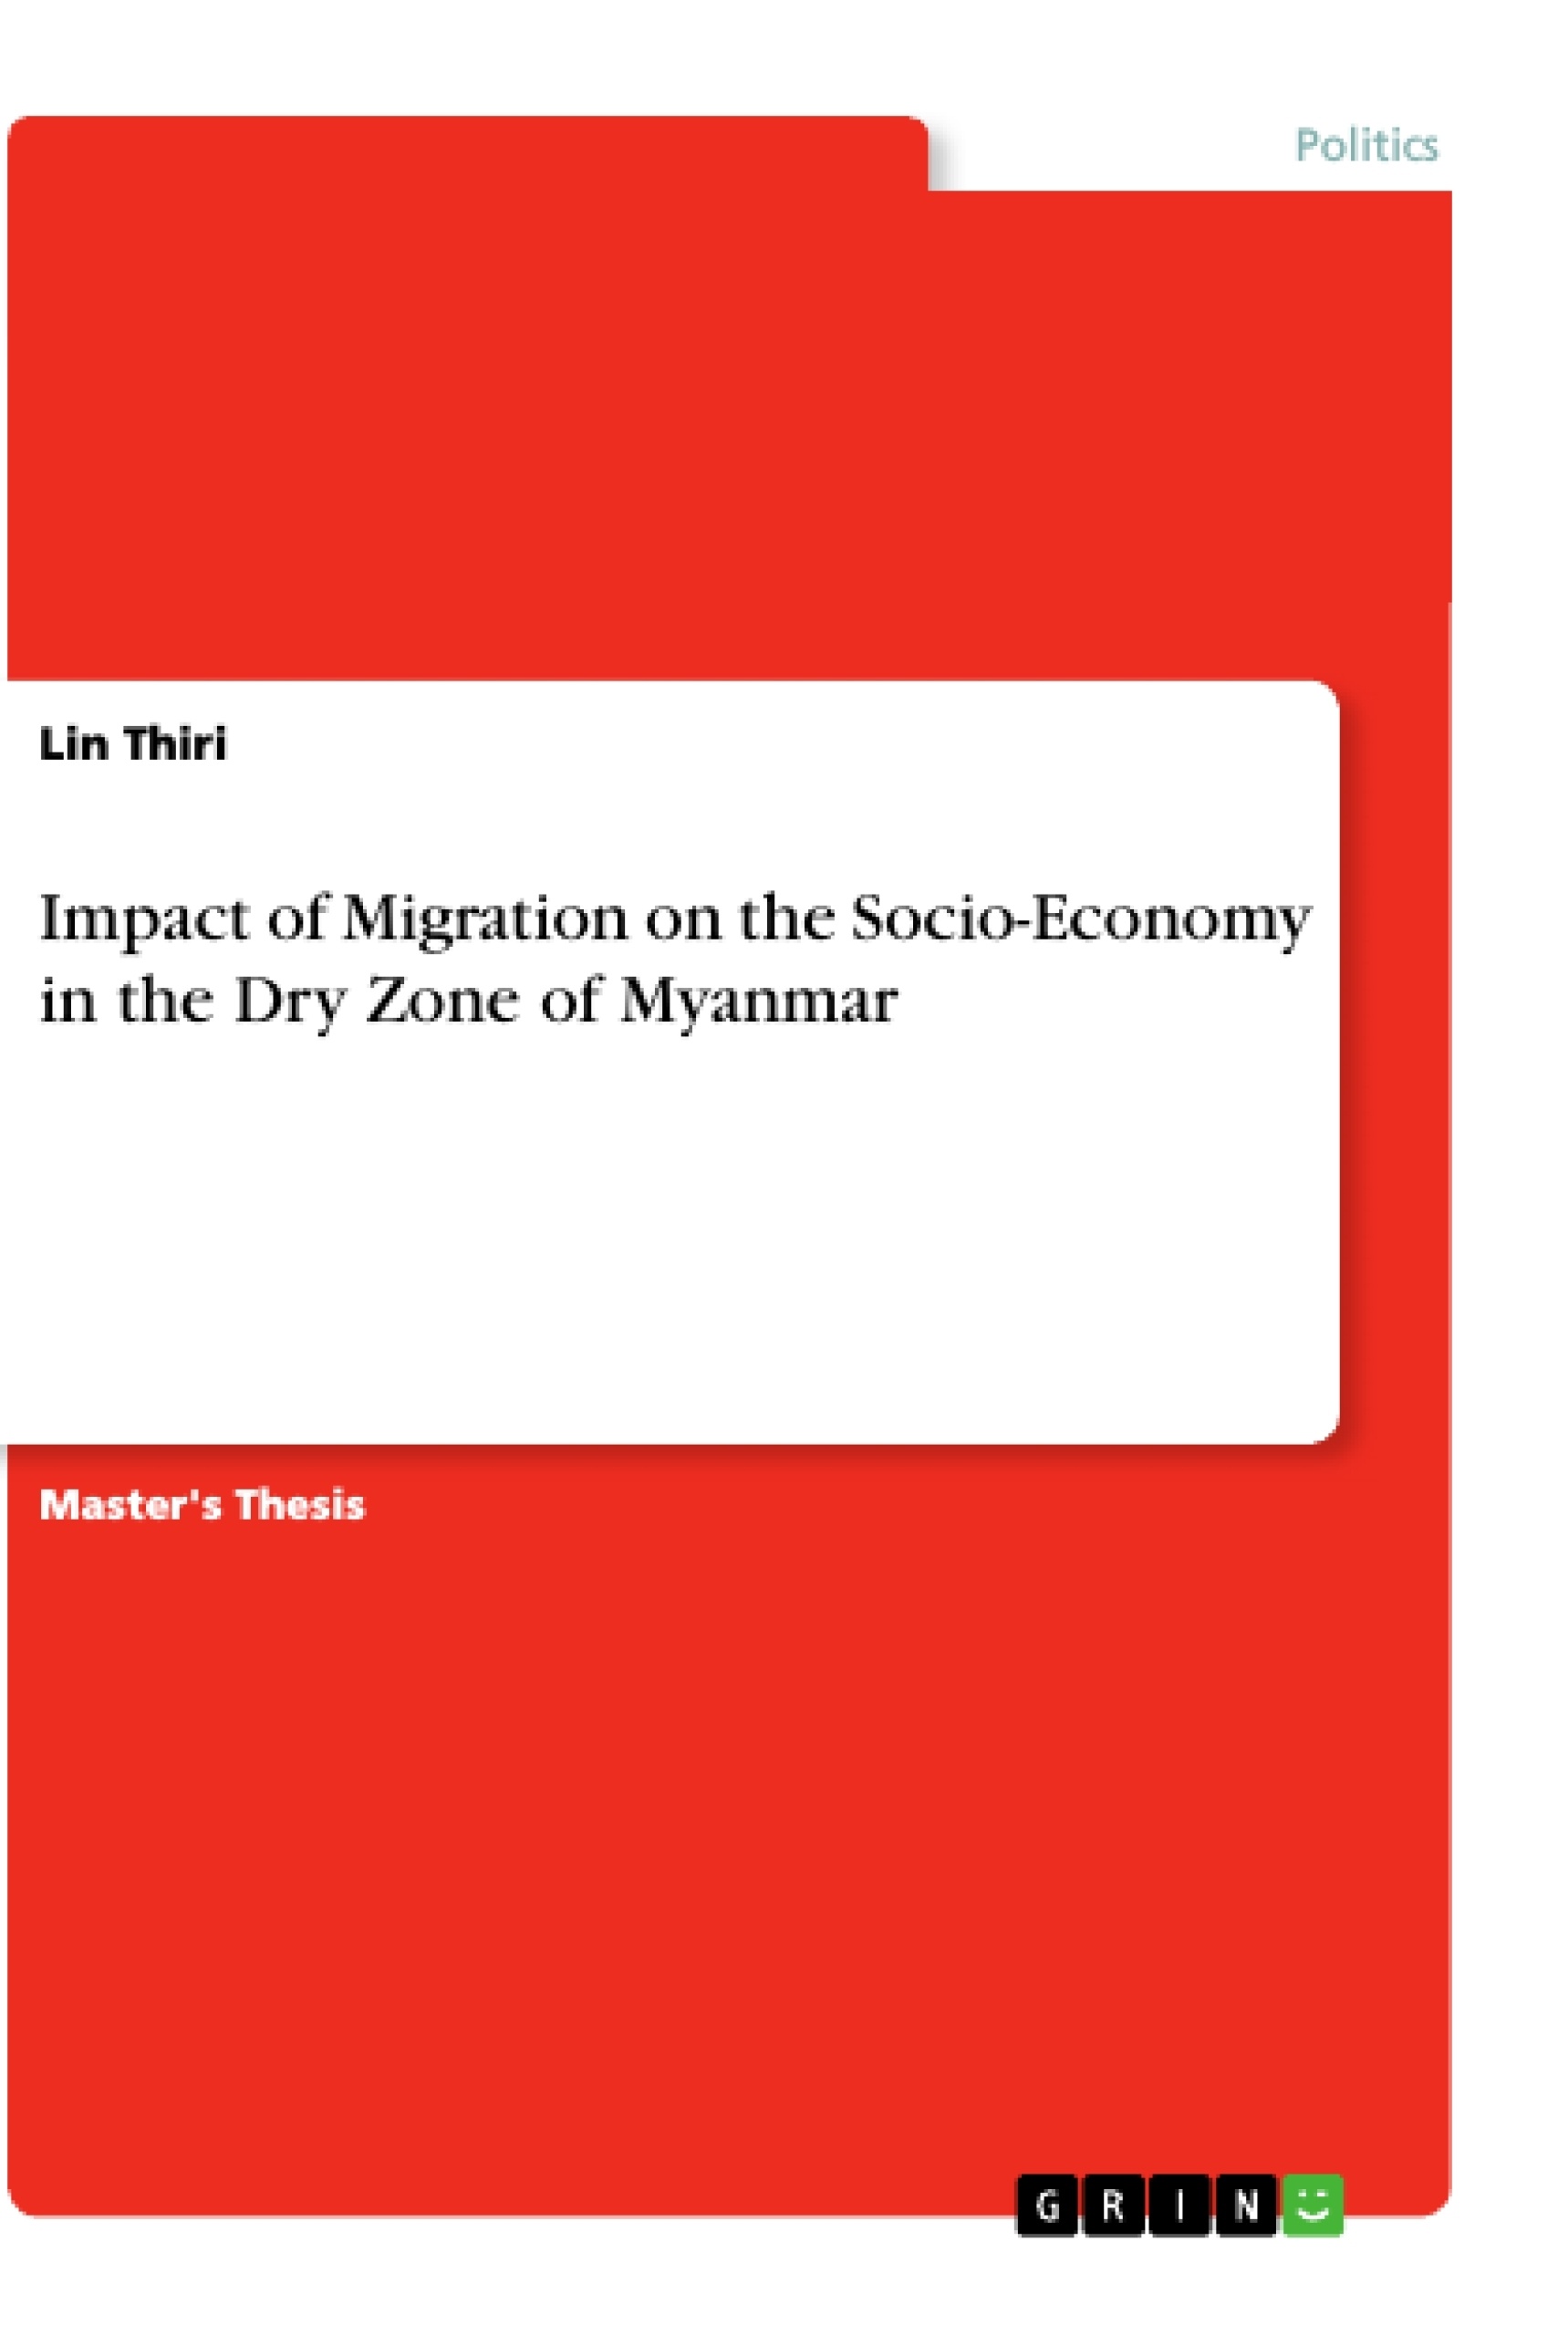 Title: Impact of Migration on the Socio-Economy in the Dry Zone of Myanmar